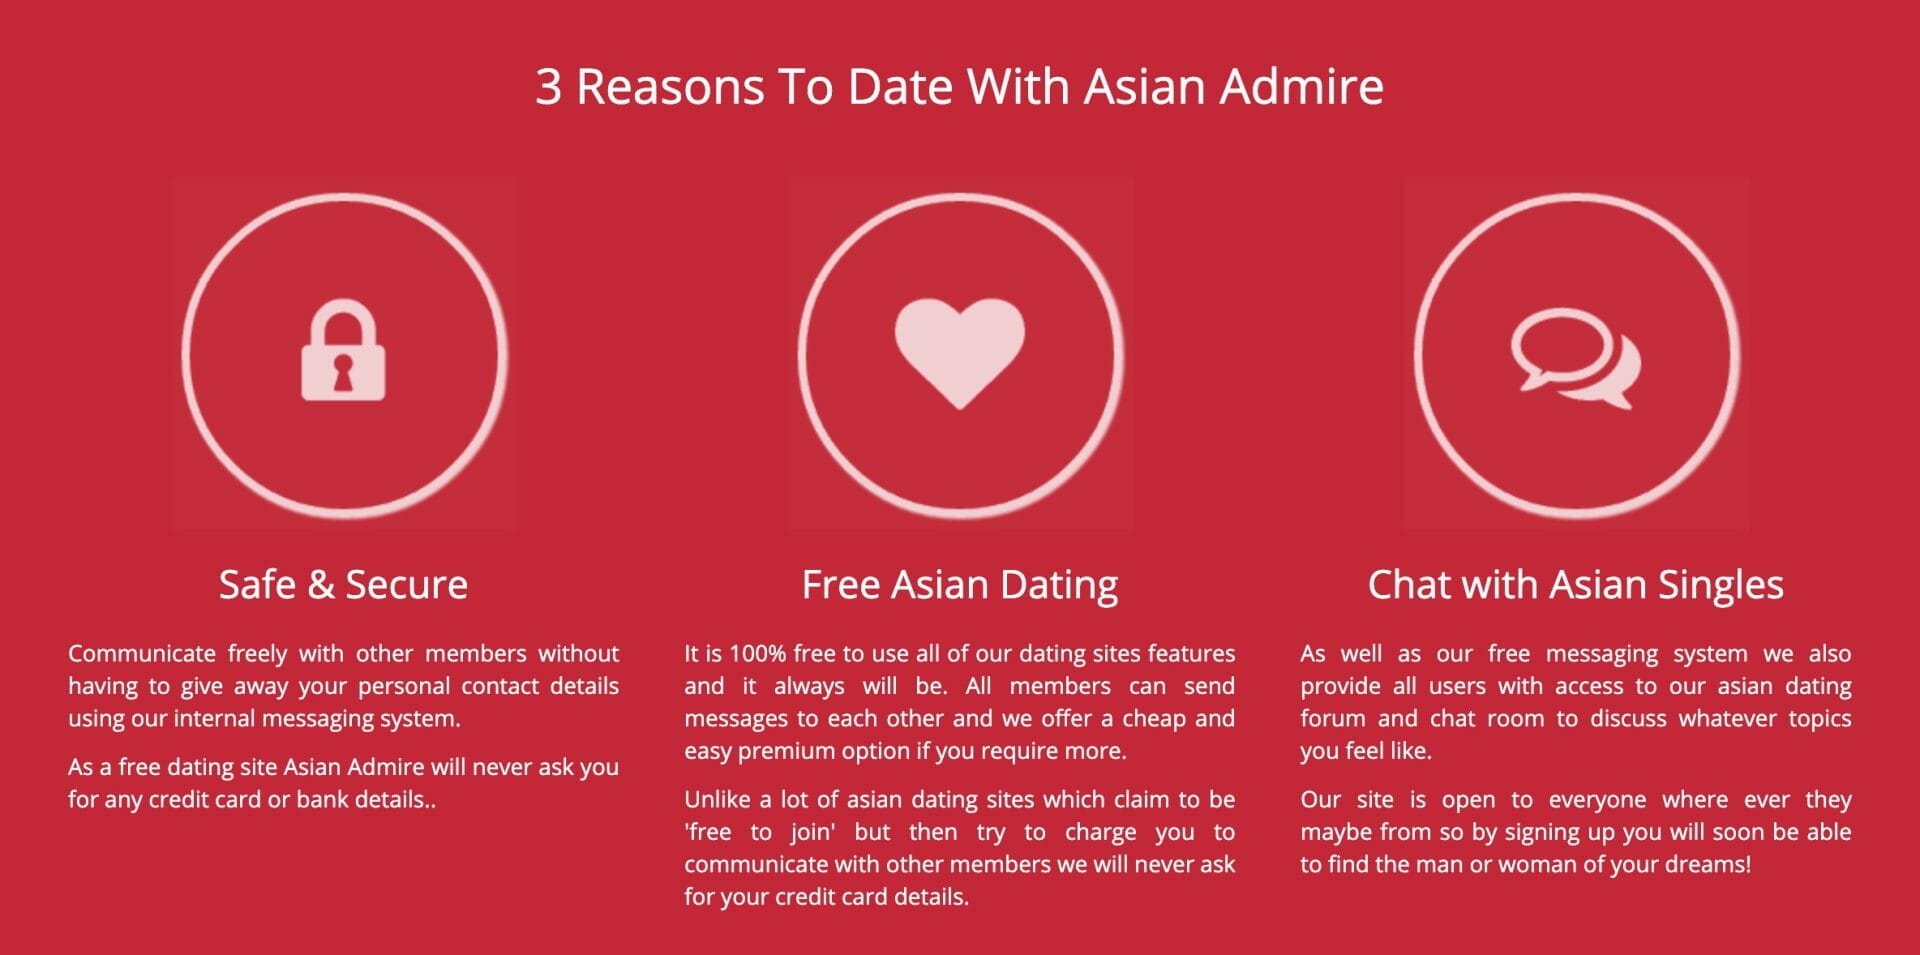 Free online dating sites were never so easy to try before talkwithstranger,...